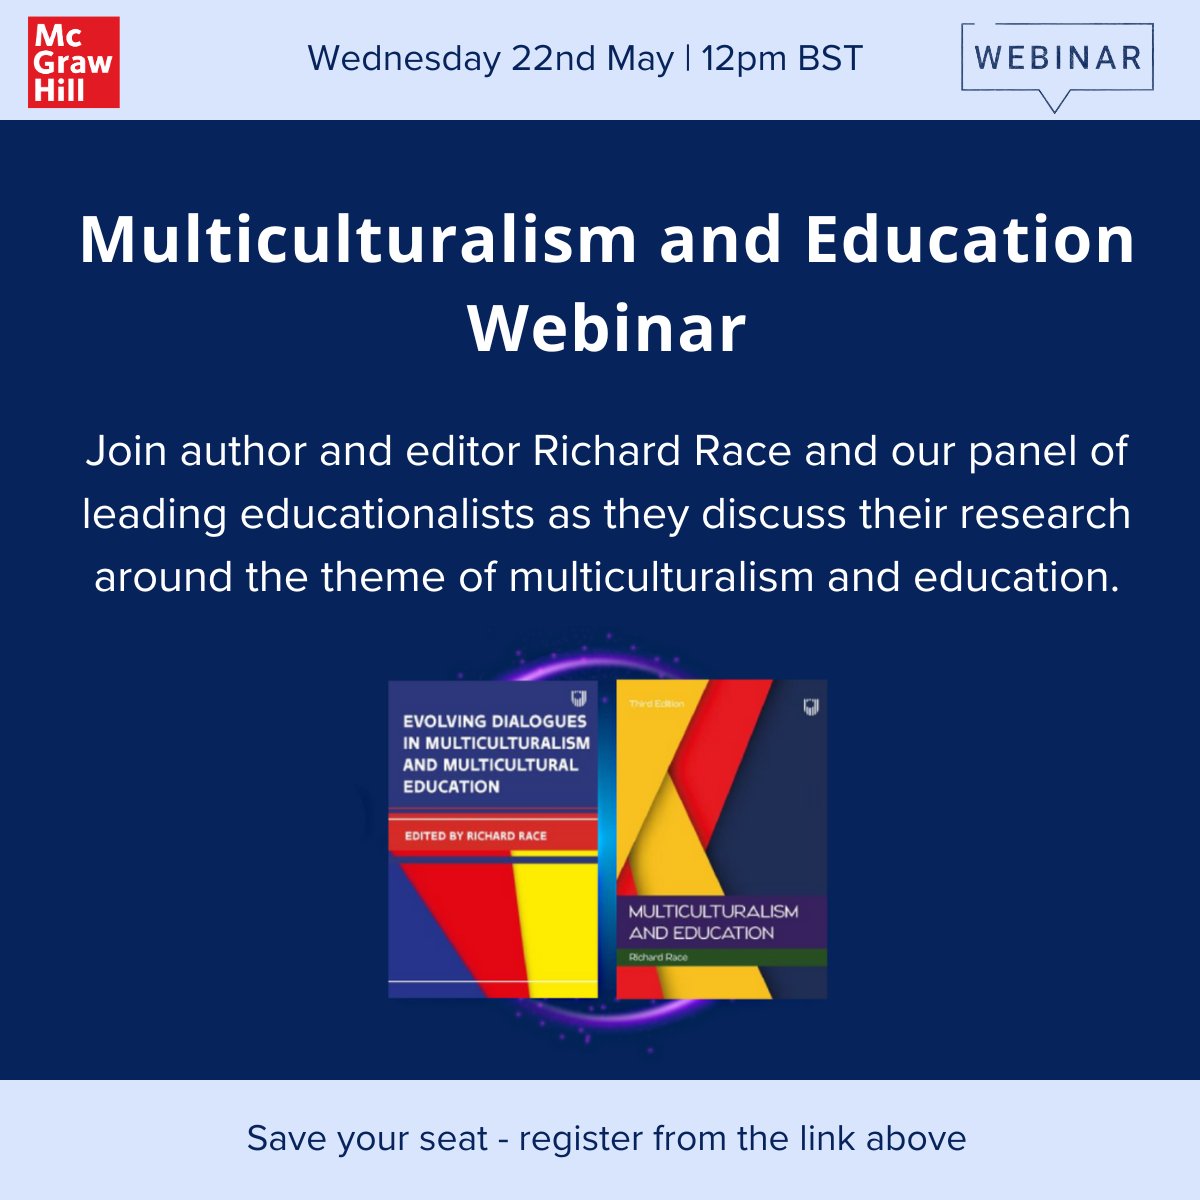 Is #Multiculturalism still relevant for #teaching? Join the debate in our webinar with author Dr Richard Race @TeessideUni, Maria Williams @IOE_London, @AdamLang78, @IamAdaMau and Dr Leena Robertson @MiddlesexUni on Wed 22 May at 12pm BST. Register here: mheducation.co.uk/blog/Multicult…